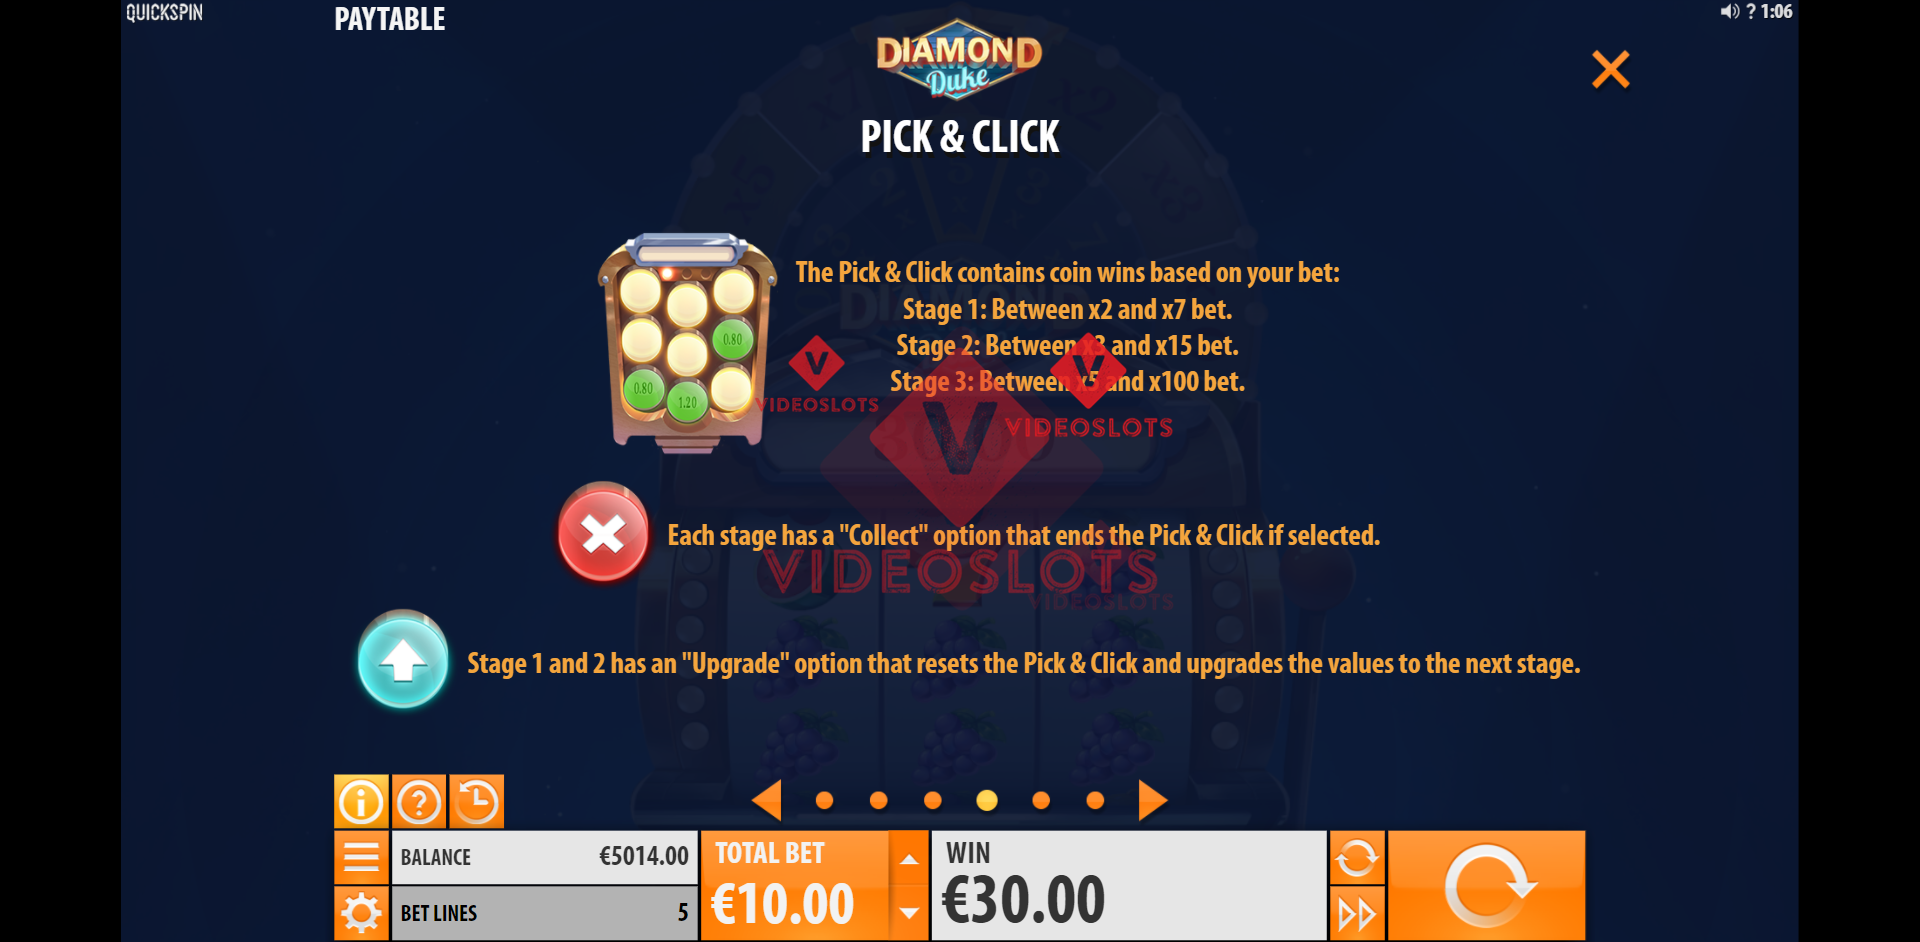 Pay Table and Game Info for Diamond Duke slot from Quickspin